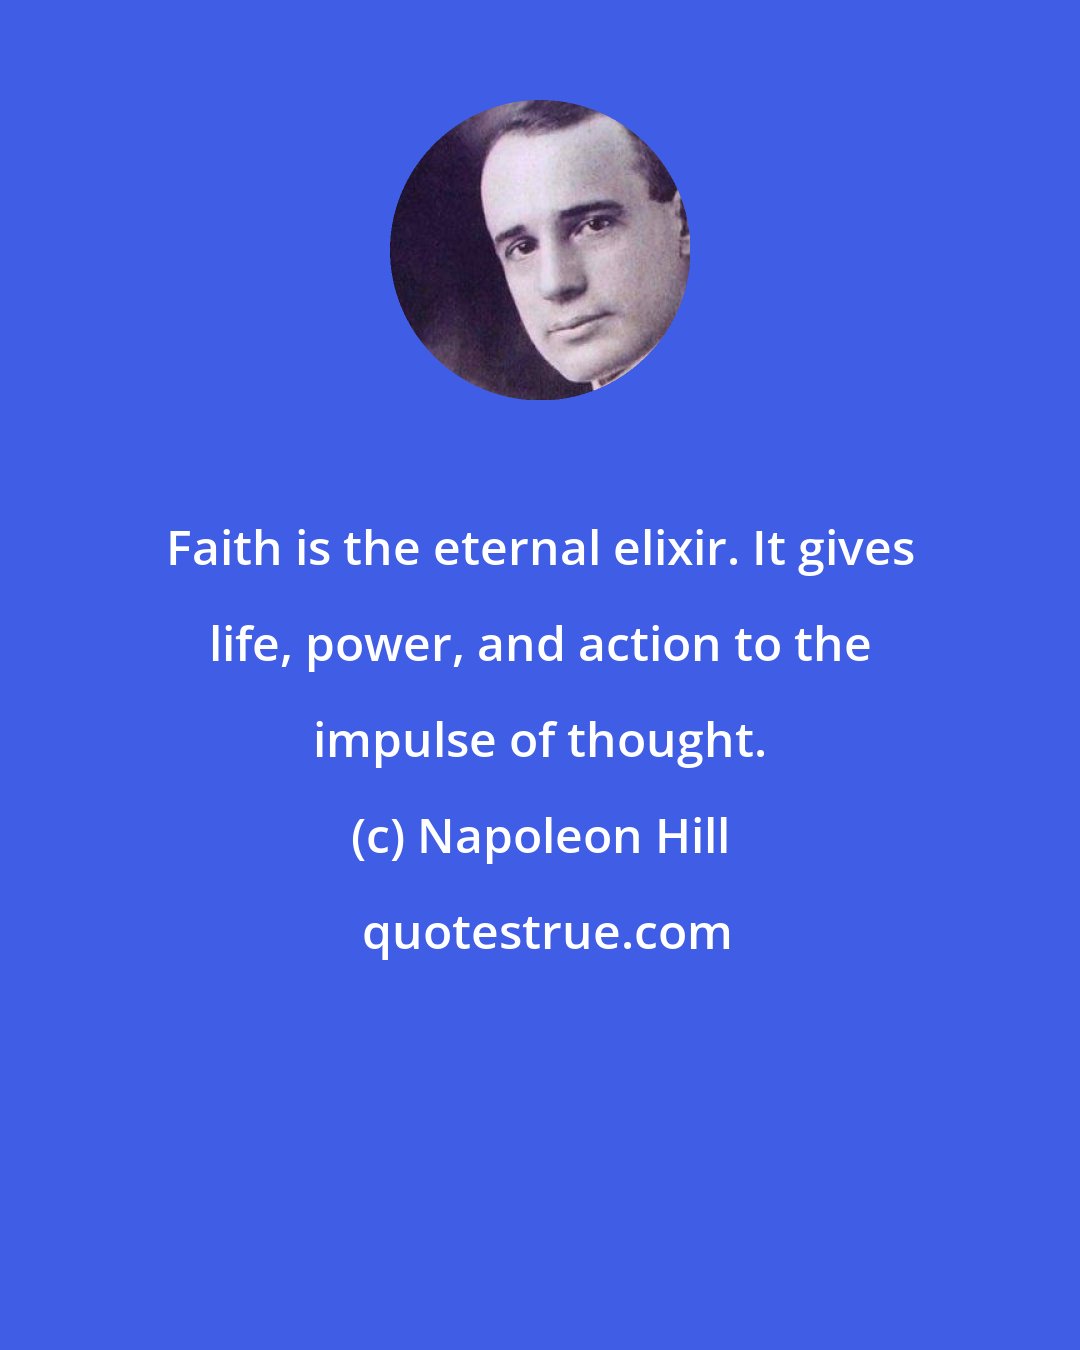 Napoleon Hill: Faith is the eternal elixir. It gives life, power, and action to the impulse of thought.